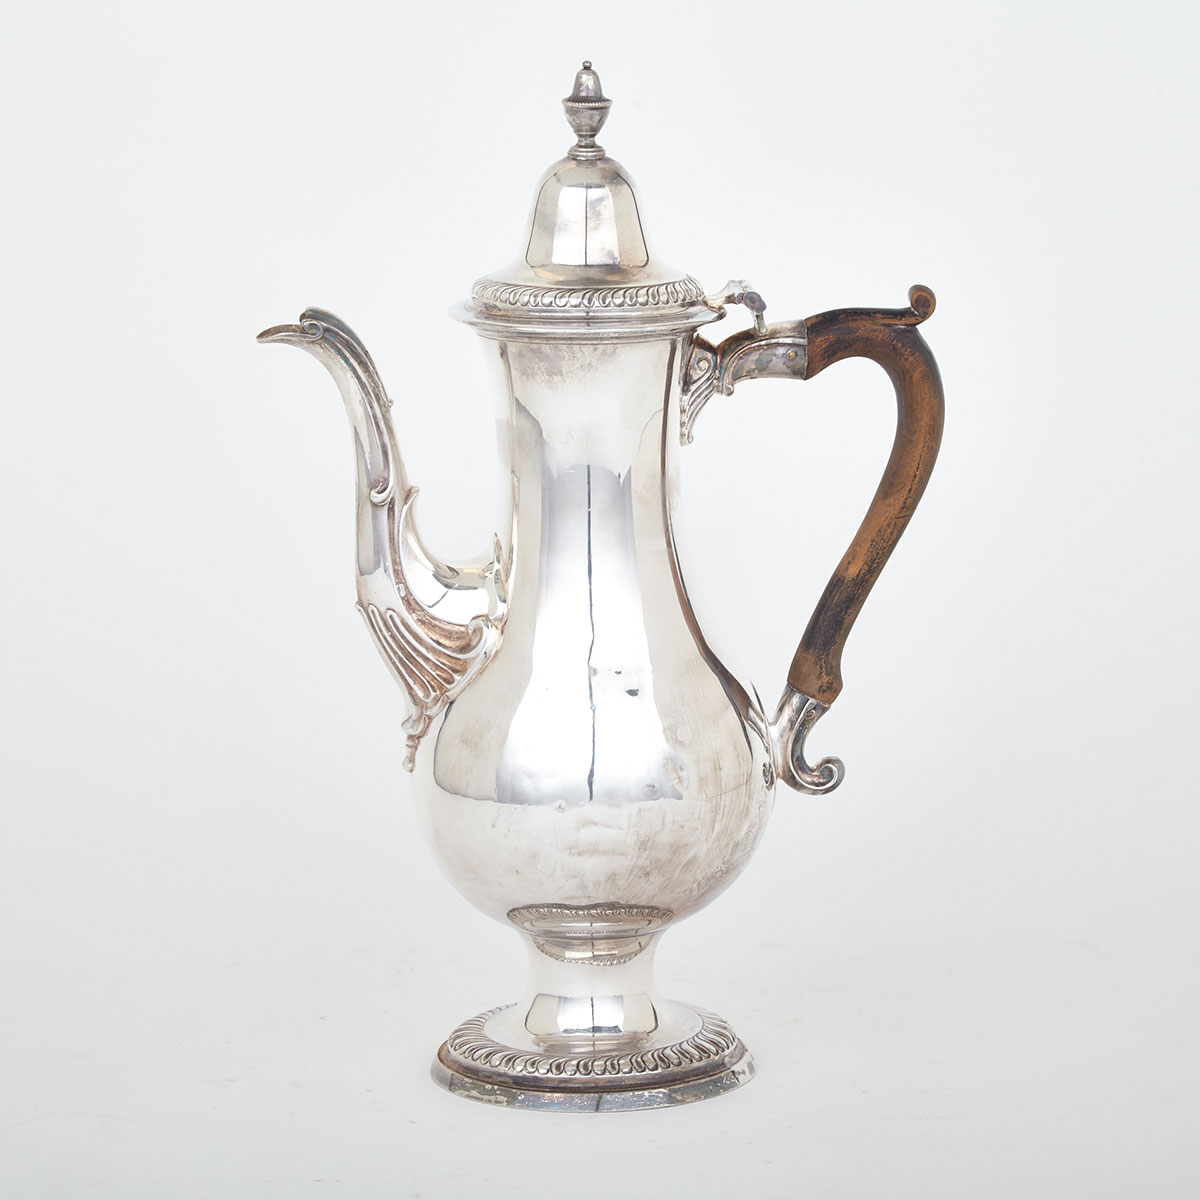 GEORGE III SILVER COFFEE POT, NEWCASTLE, 1784 of plain baluster form with domed cover and urn